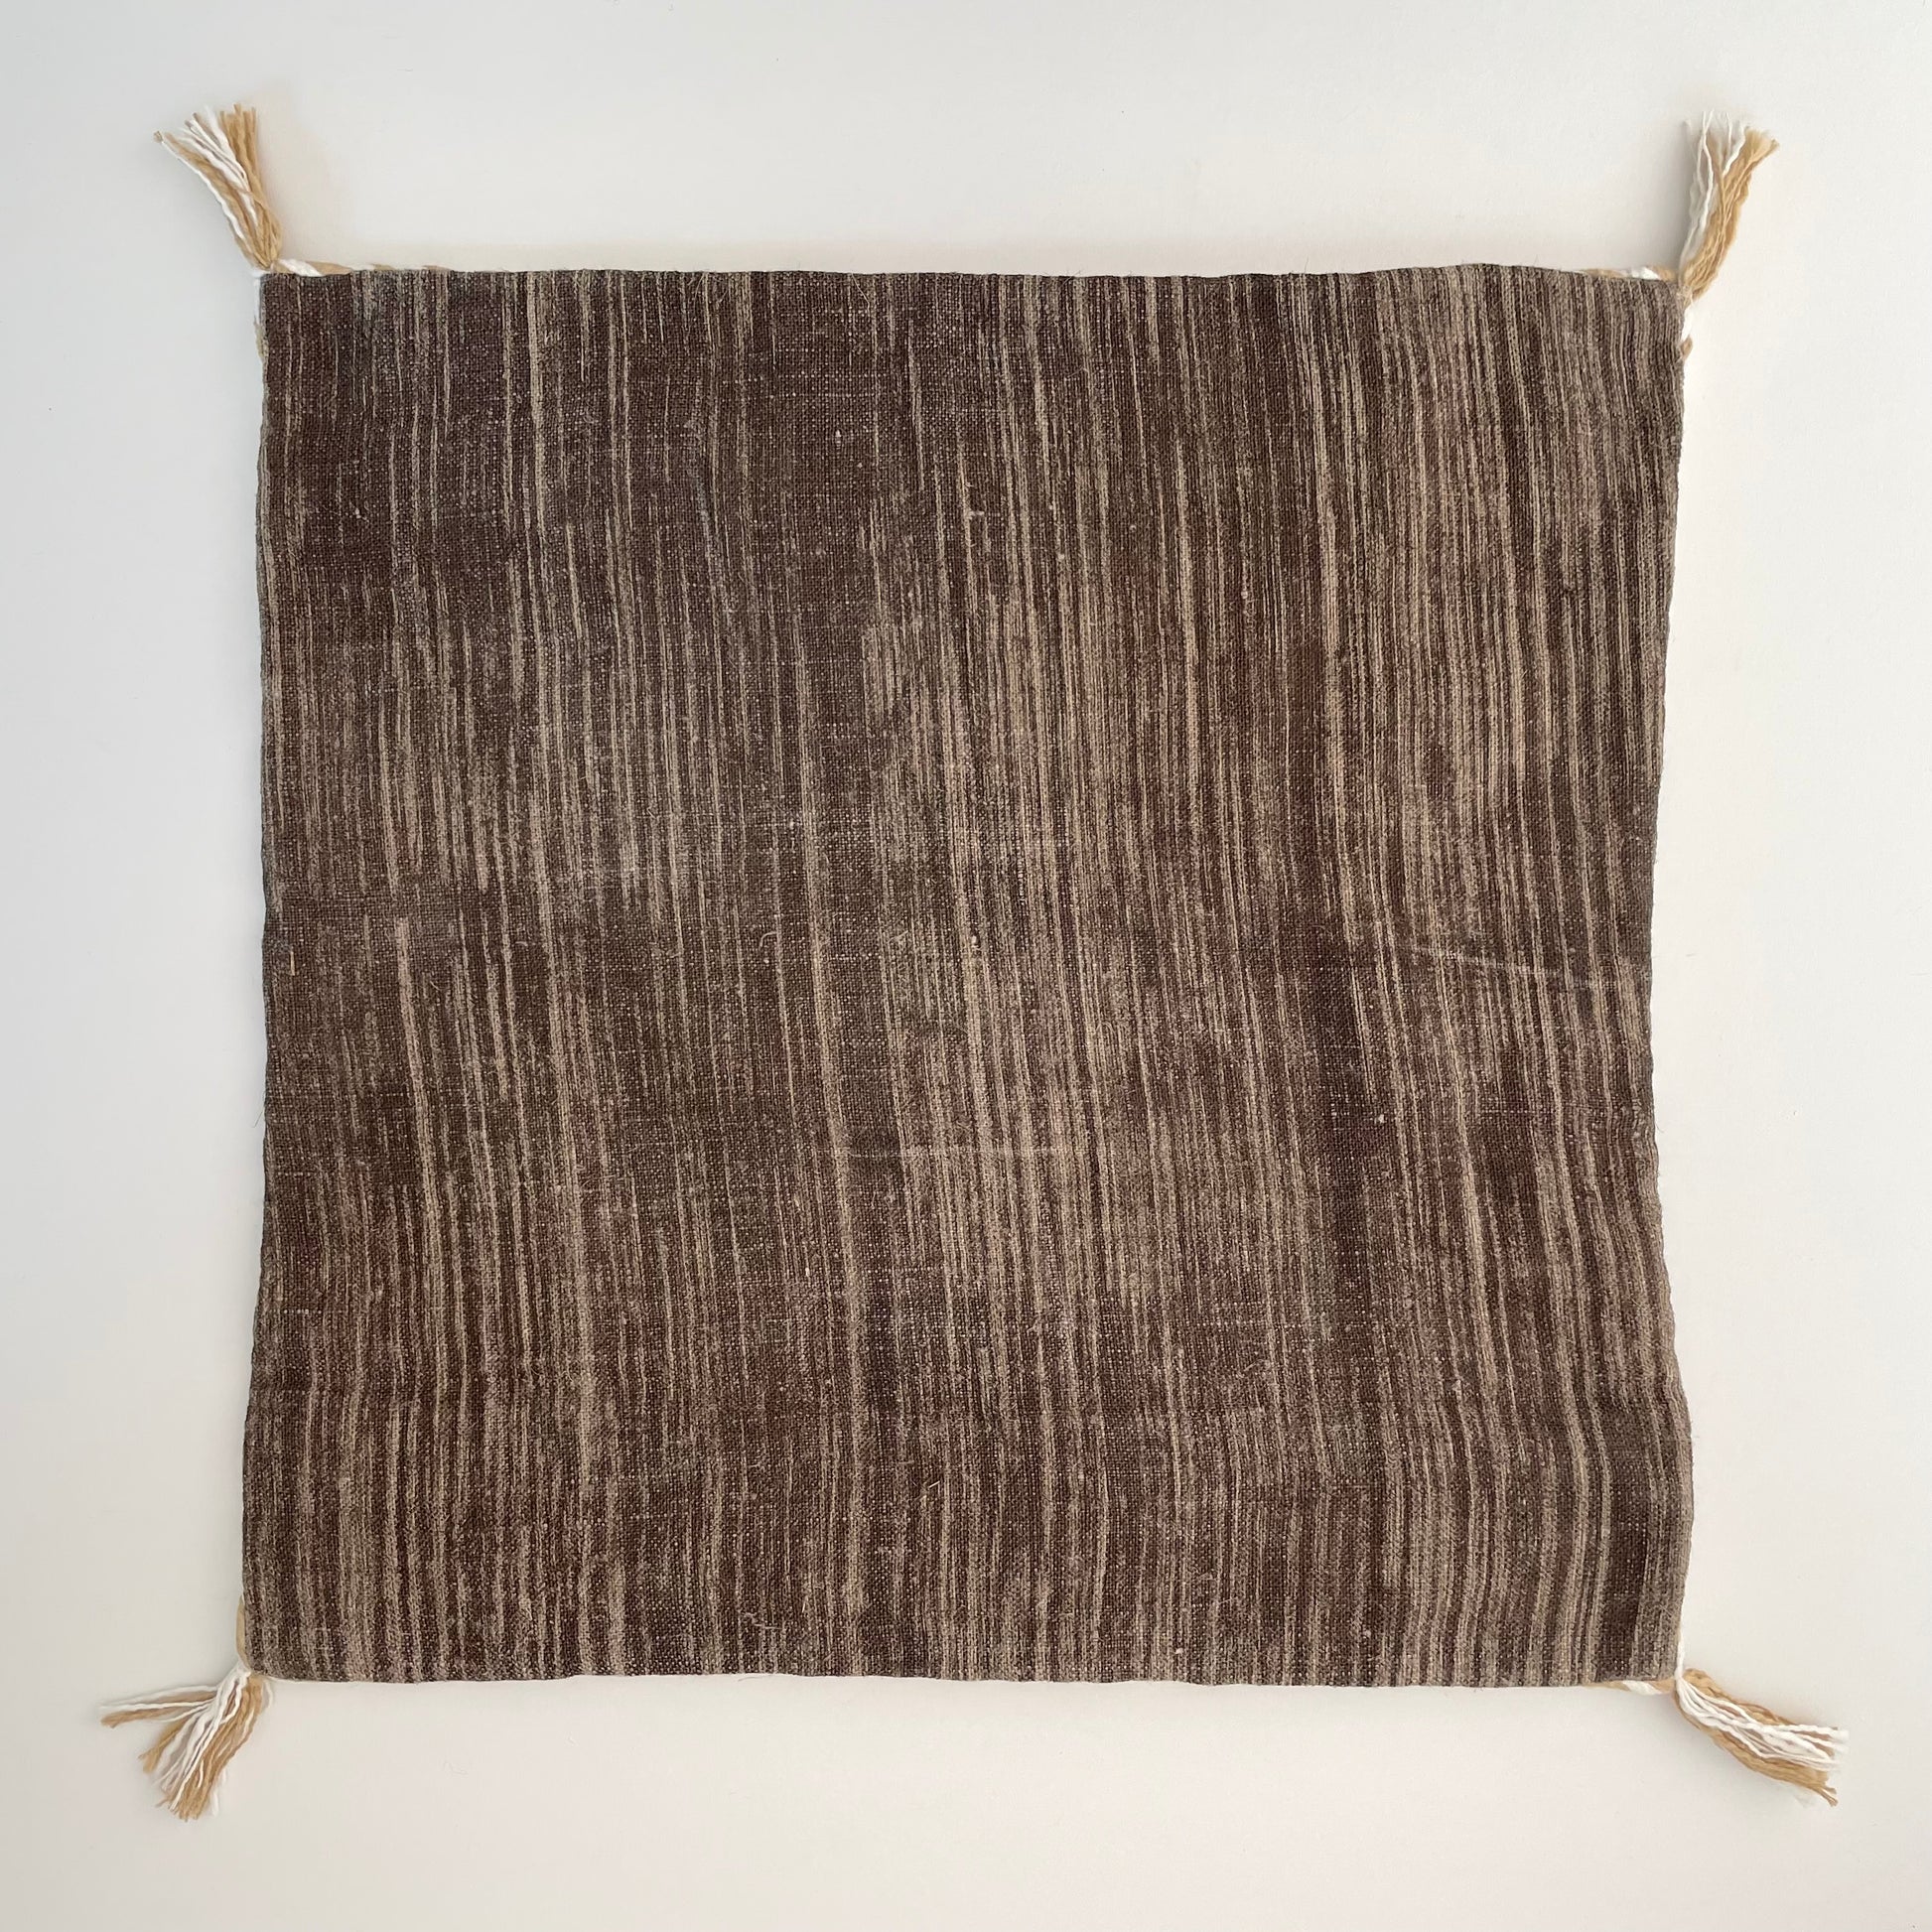 chocolate brown linen 18x18 square pillow cover with striped edging and tassels